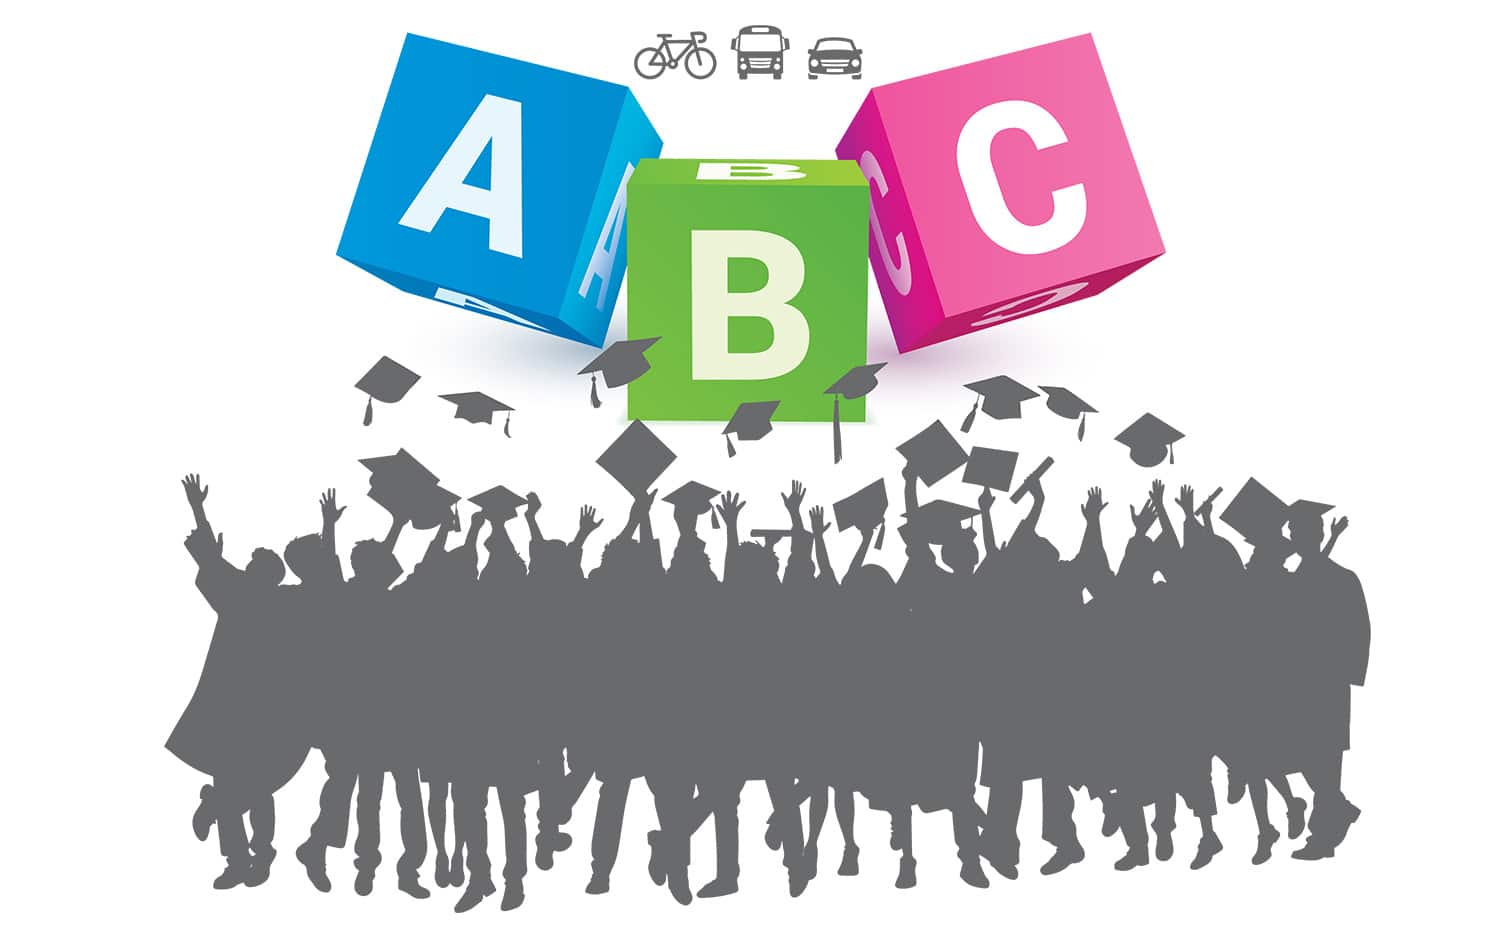 Colorful blocks 'A', 'B', 'C' with bike, cars, and cap symbols. Silhouetted graduates below.